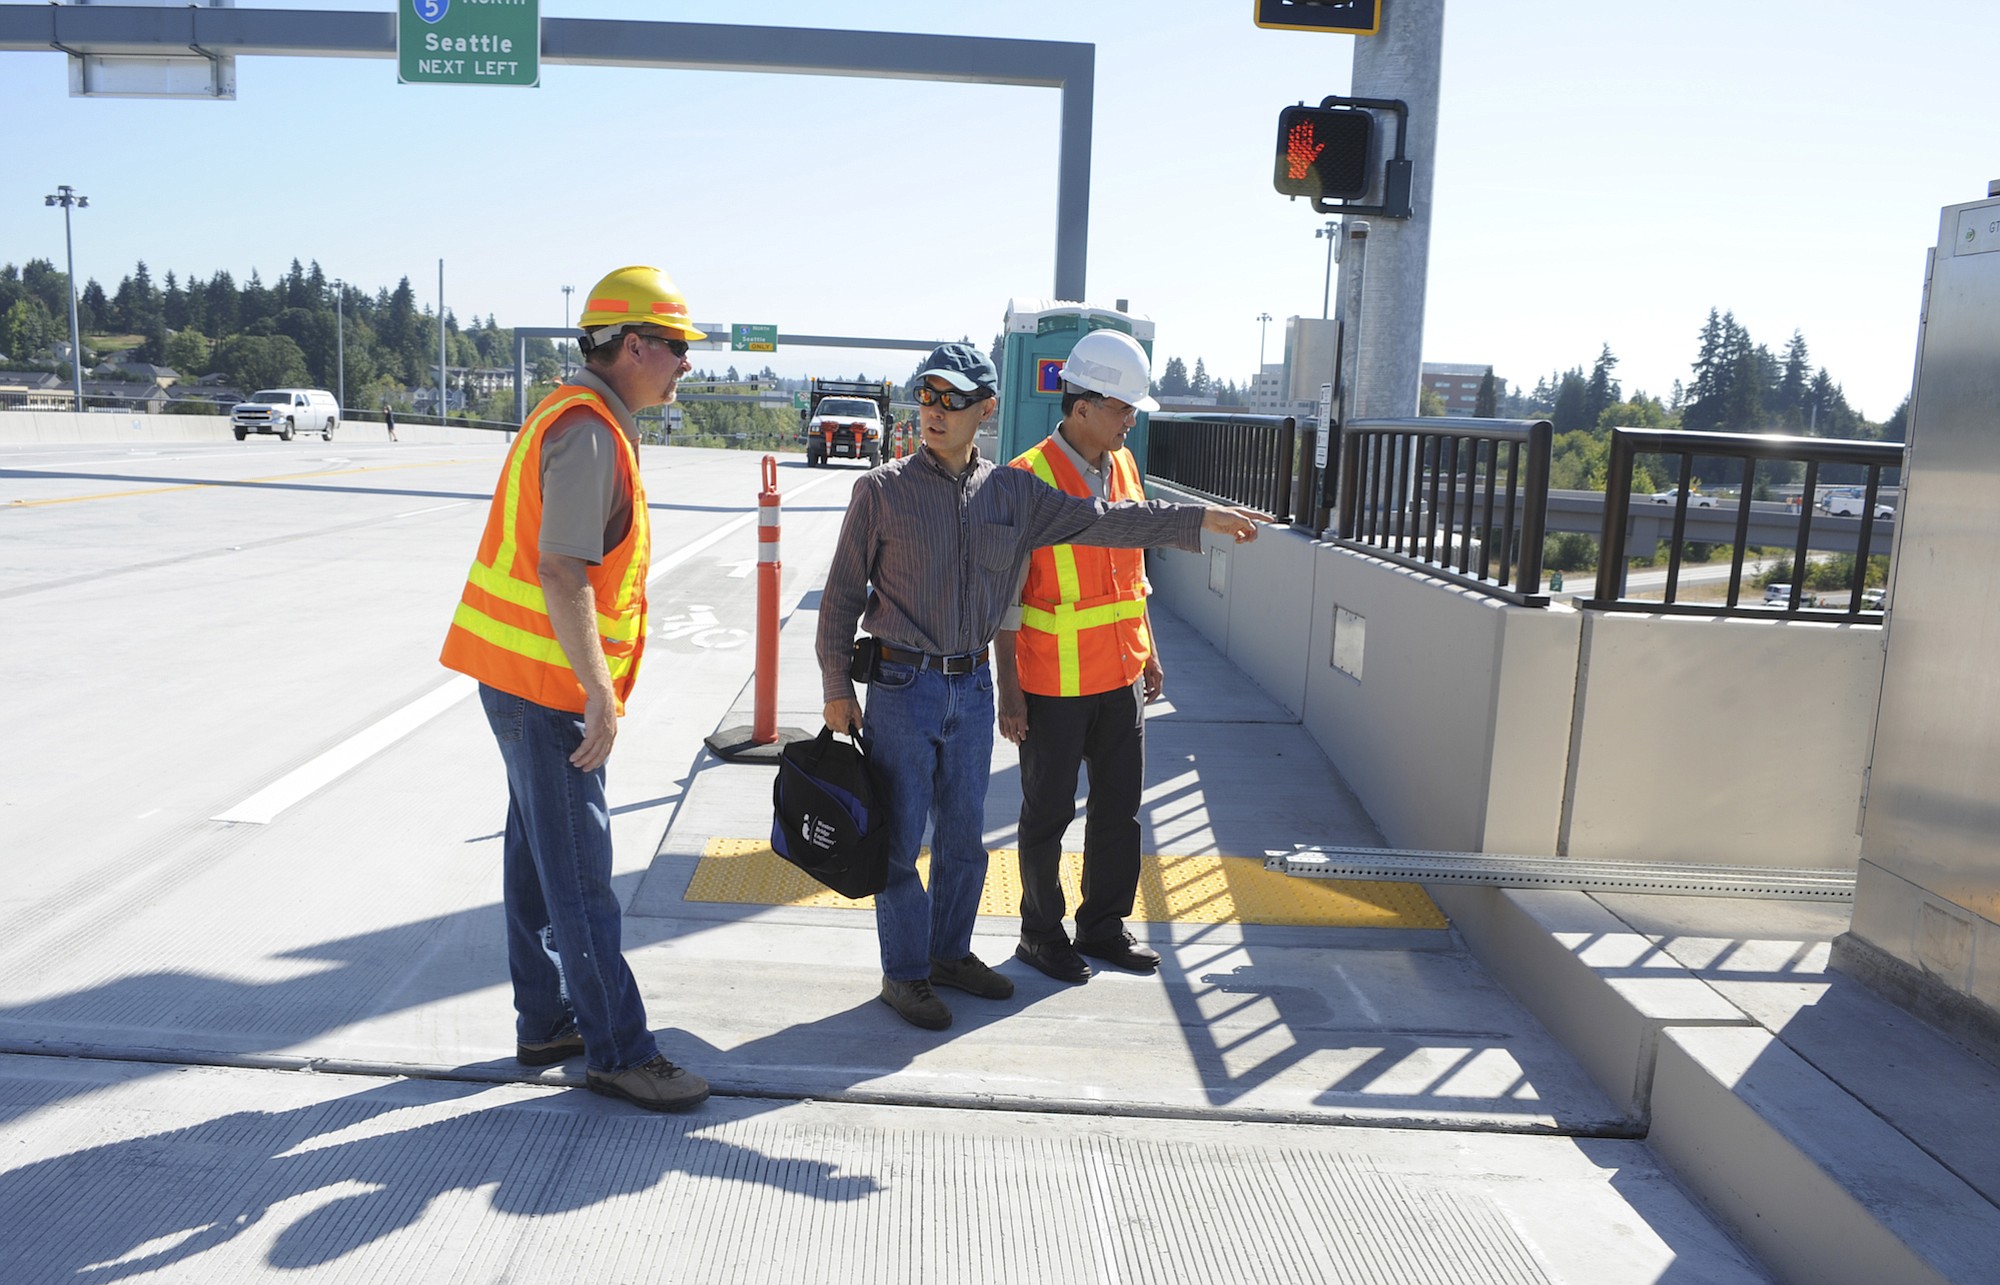 Engineers do some last minute checks as WSDOT opens the new freeway interchange and the NE 139th Street bridge with a ribbon cutting at Salmon Creek in Vancouver  Wa., Wednesday August 27, 2014.